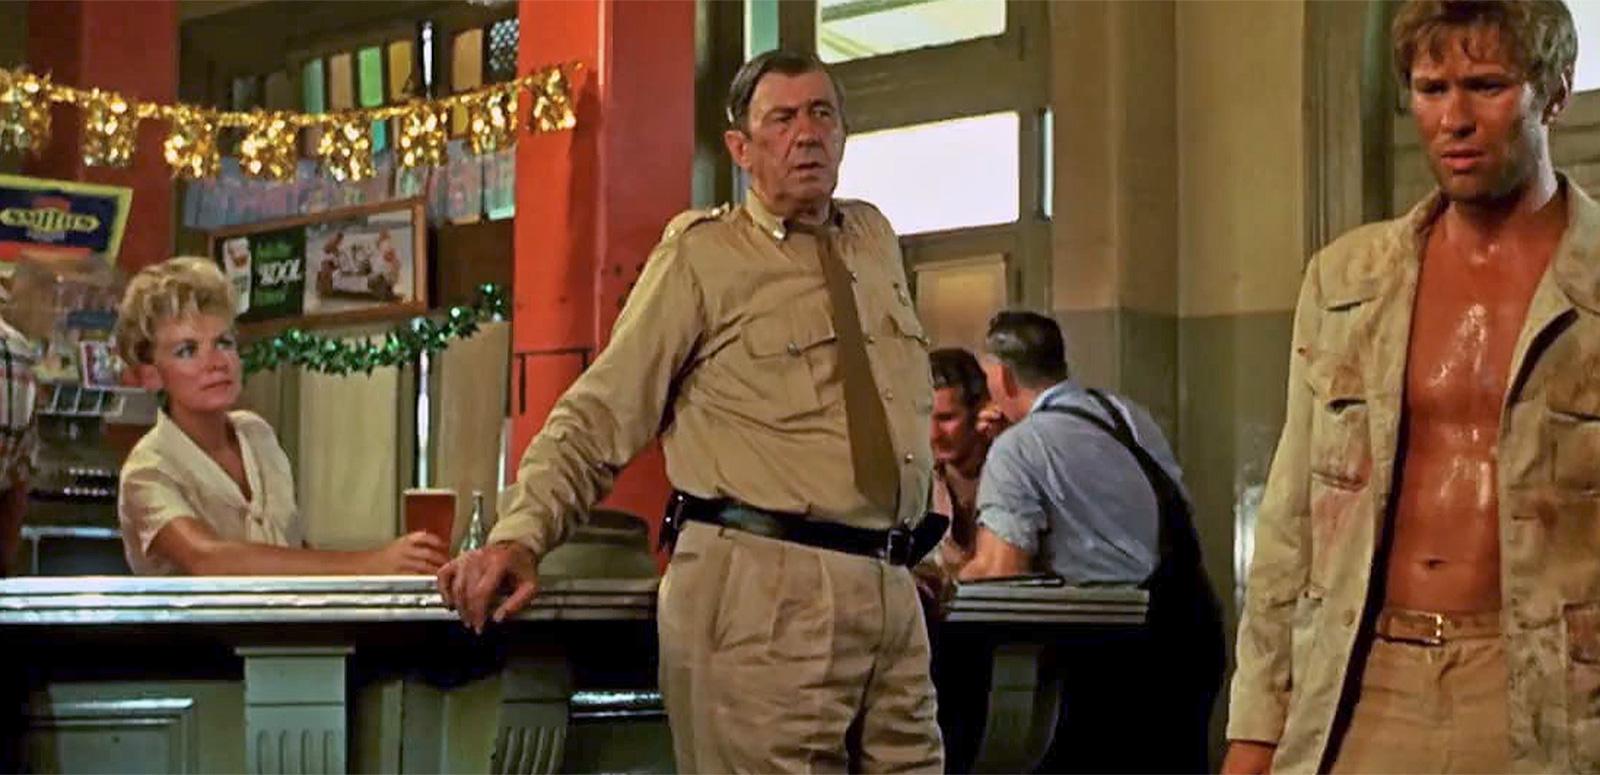 A middle-aged policeman leaning against a bar in a country pub looking at a young man covered in sweat and blood. Behind the bar a woman is serving a beer. The image is a scene from the film Wake in Fright. 